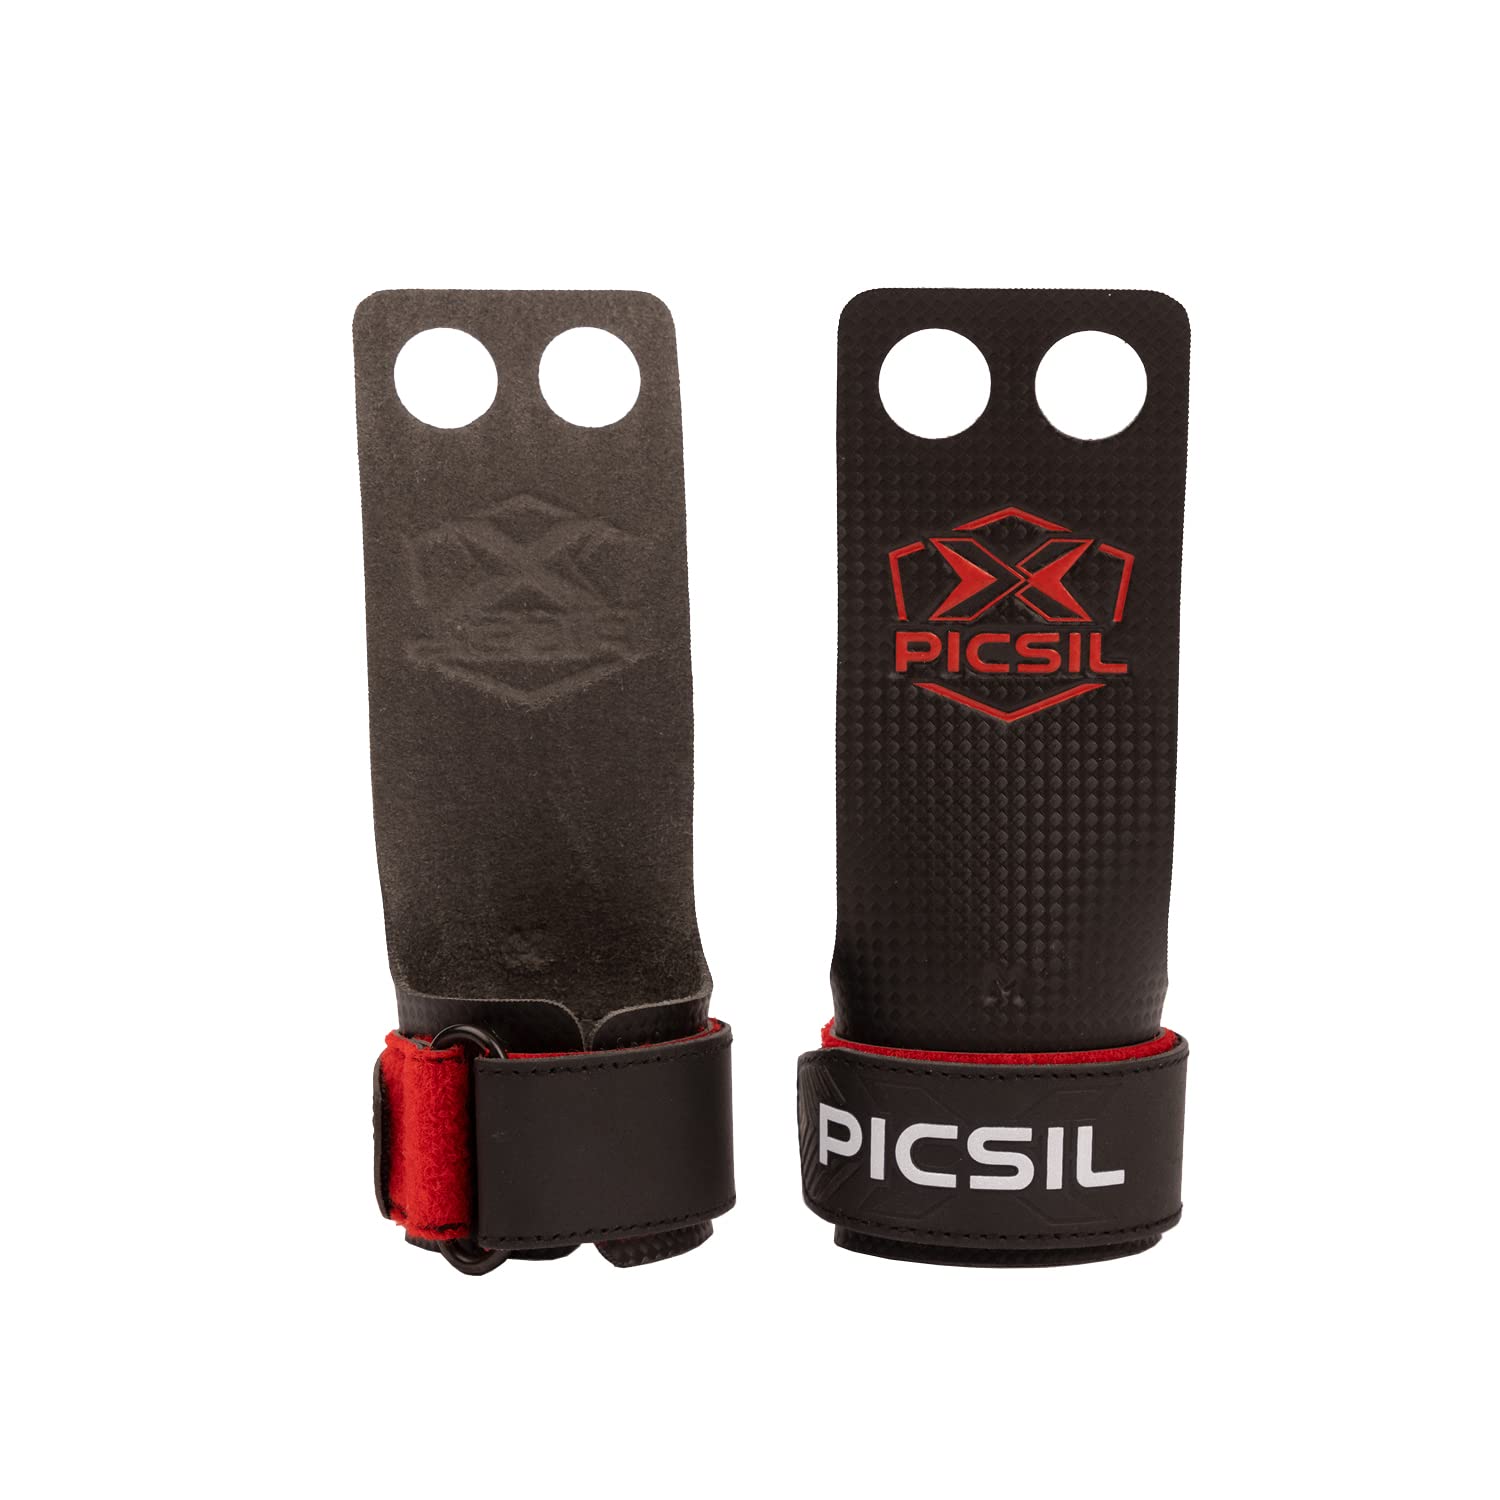 X PICSIL Falcon Grips 2&3 Holes, Hand Grips for Men, Hand Grips